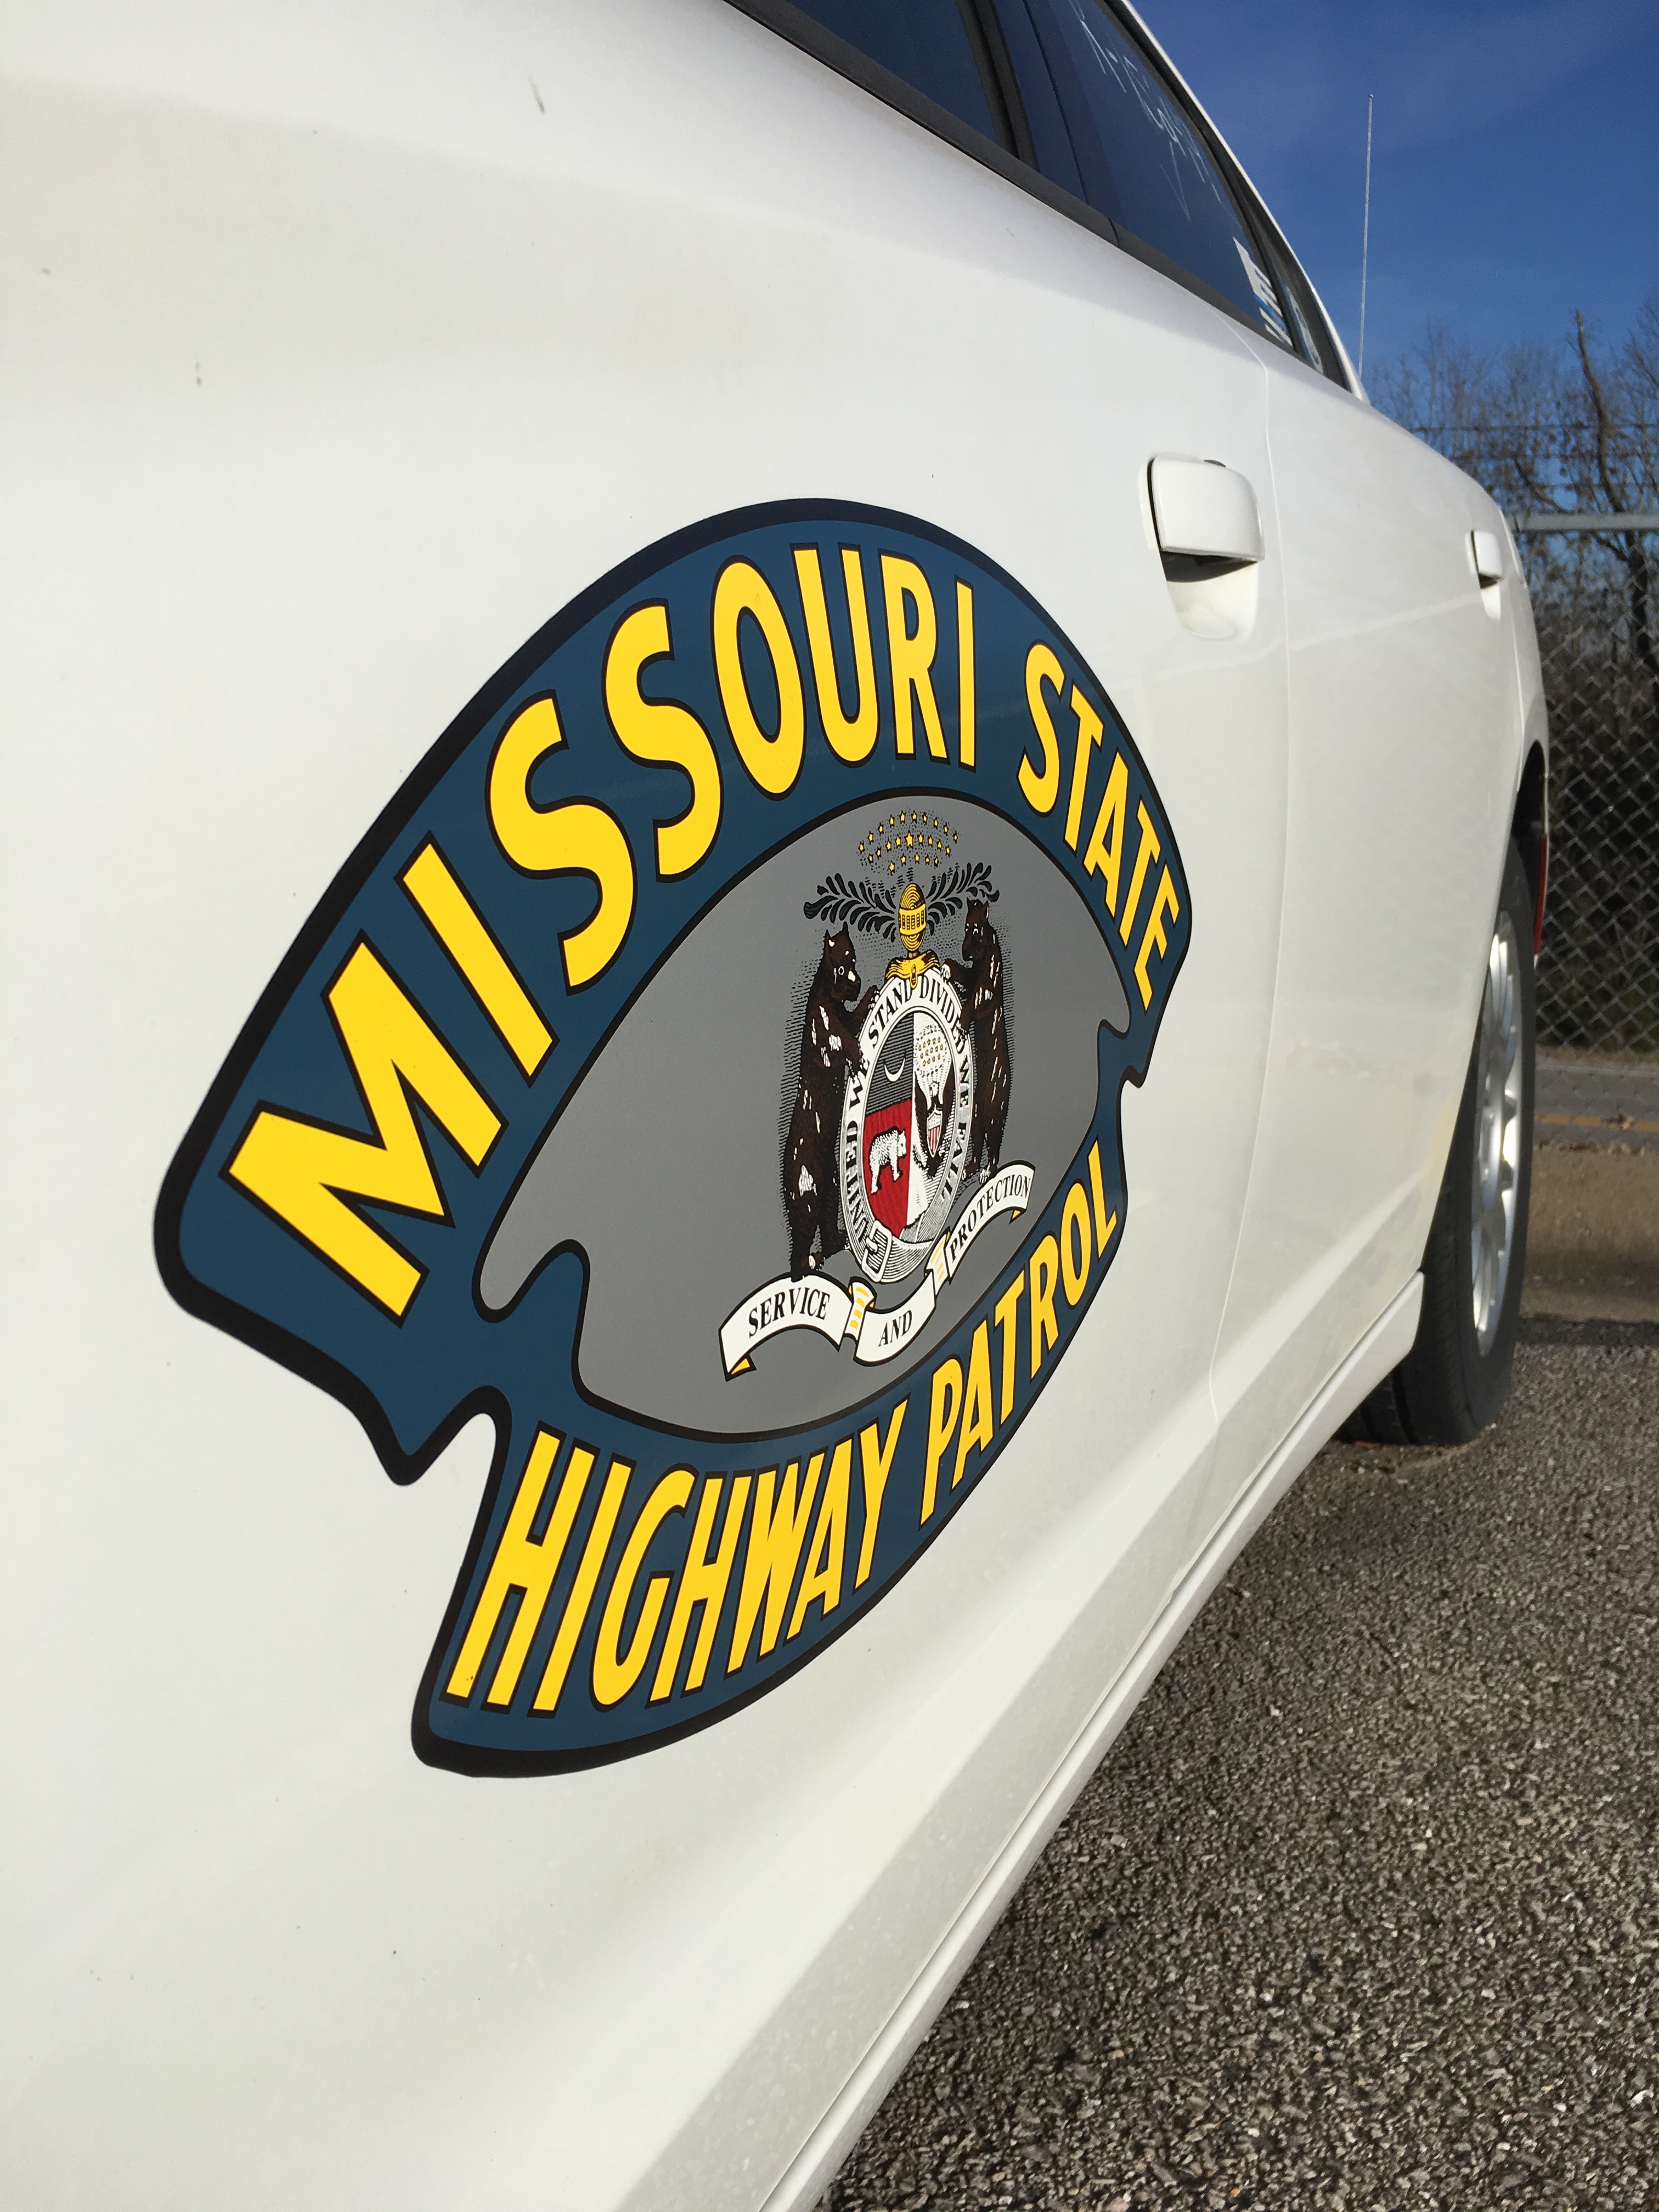 MSHP Urges Caution On Roads As Conditions Change